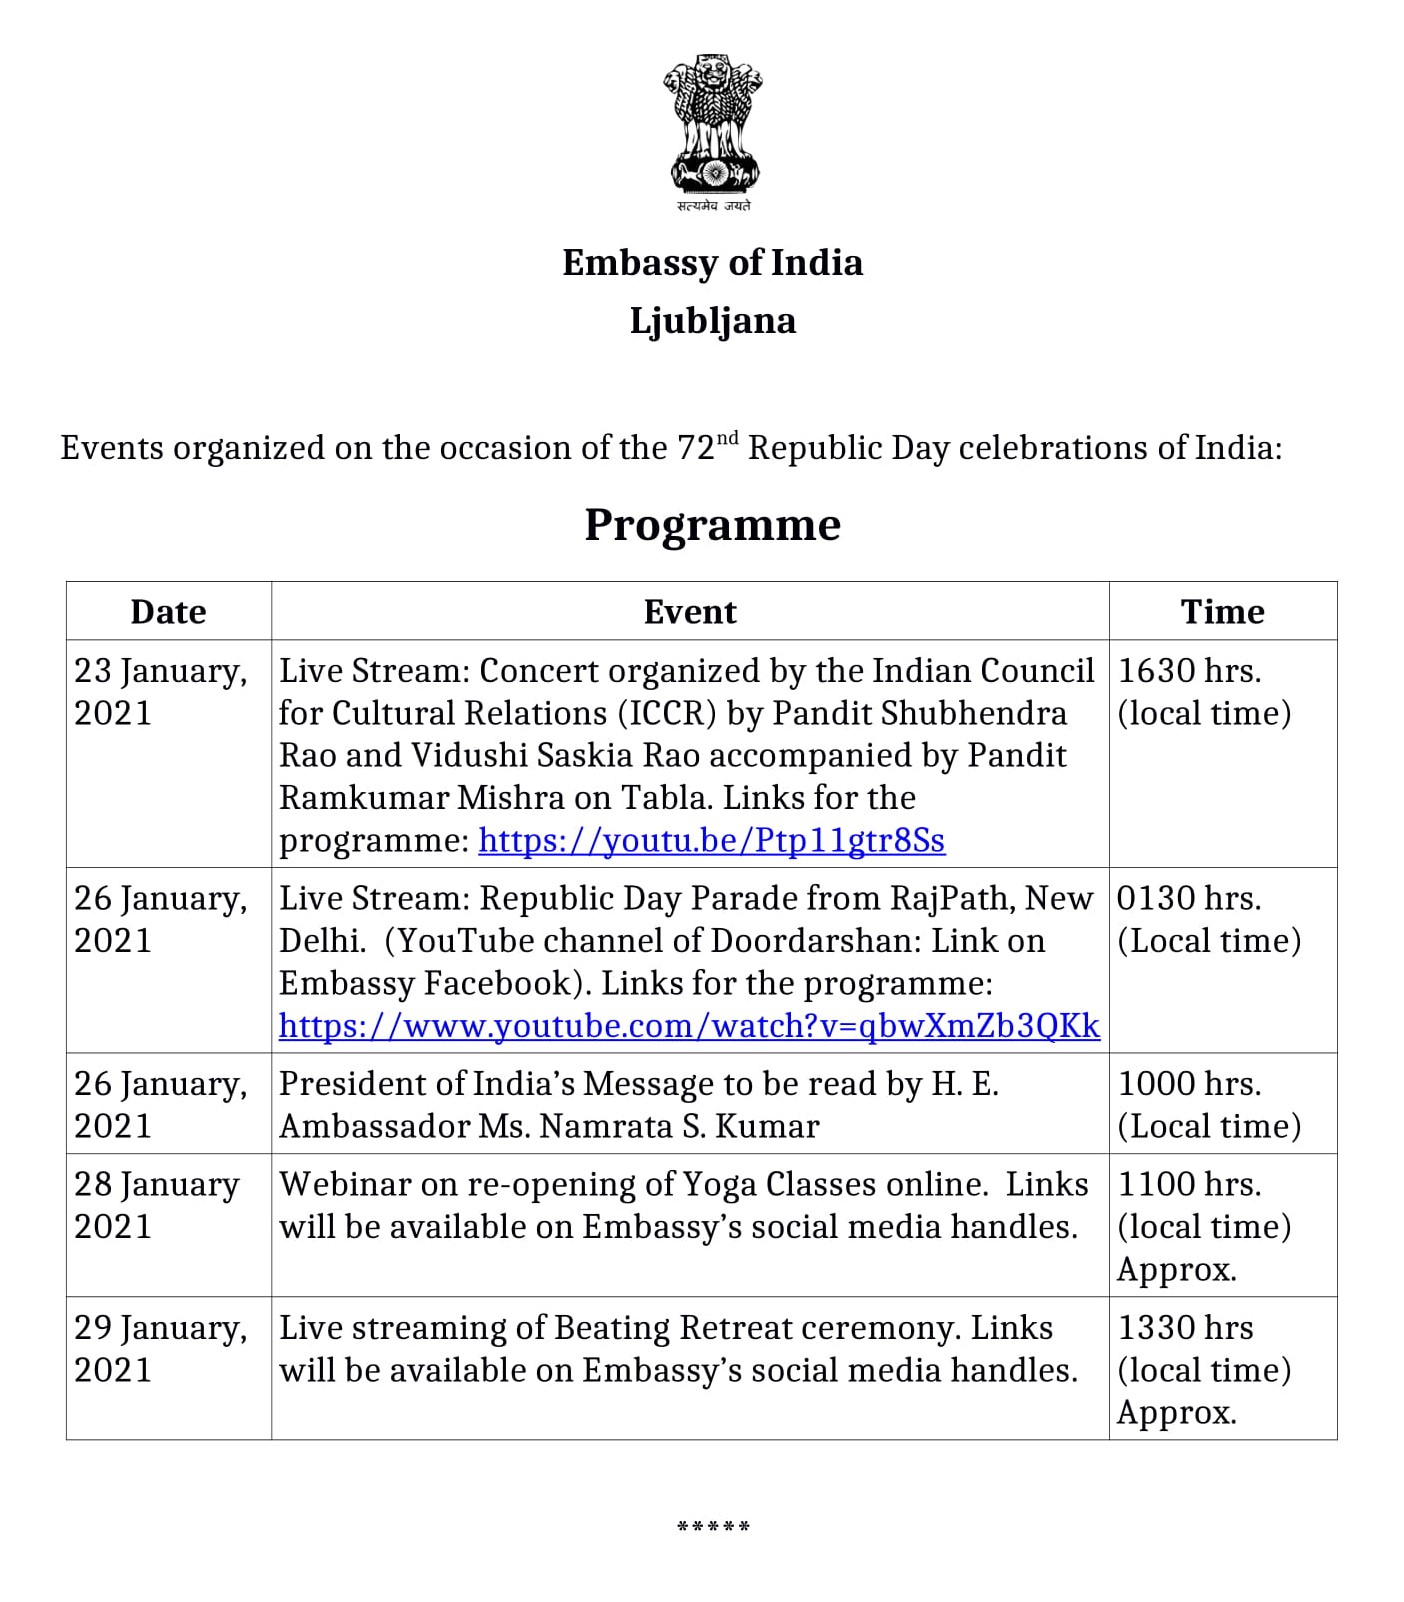 Online celebrations of 72nd Republic Day of India